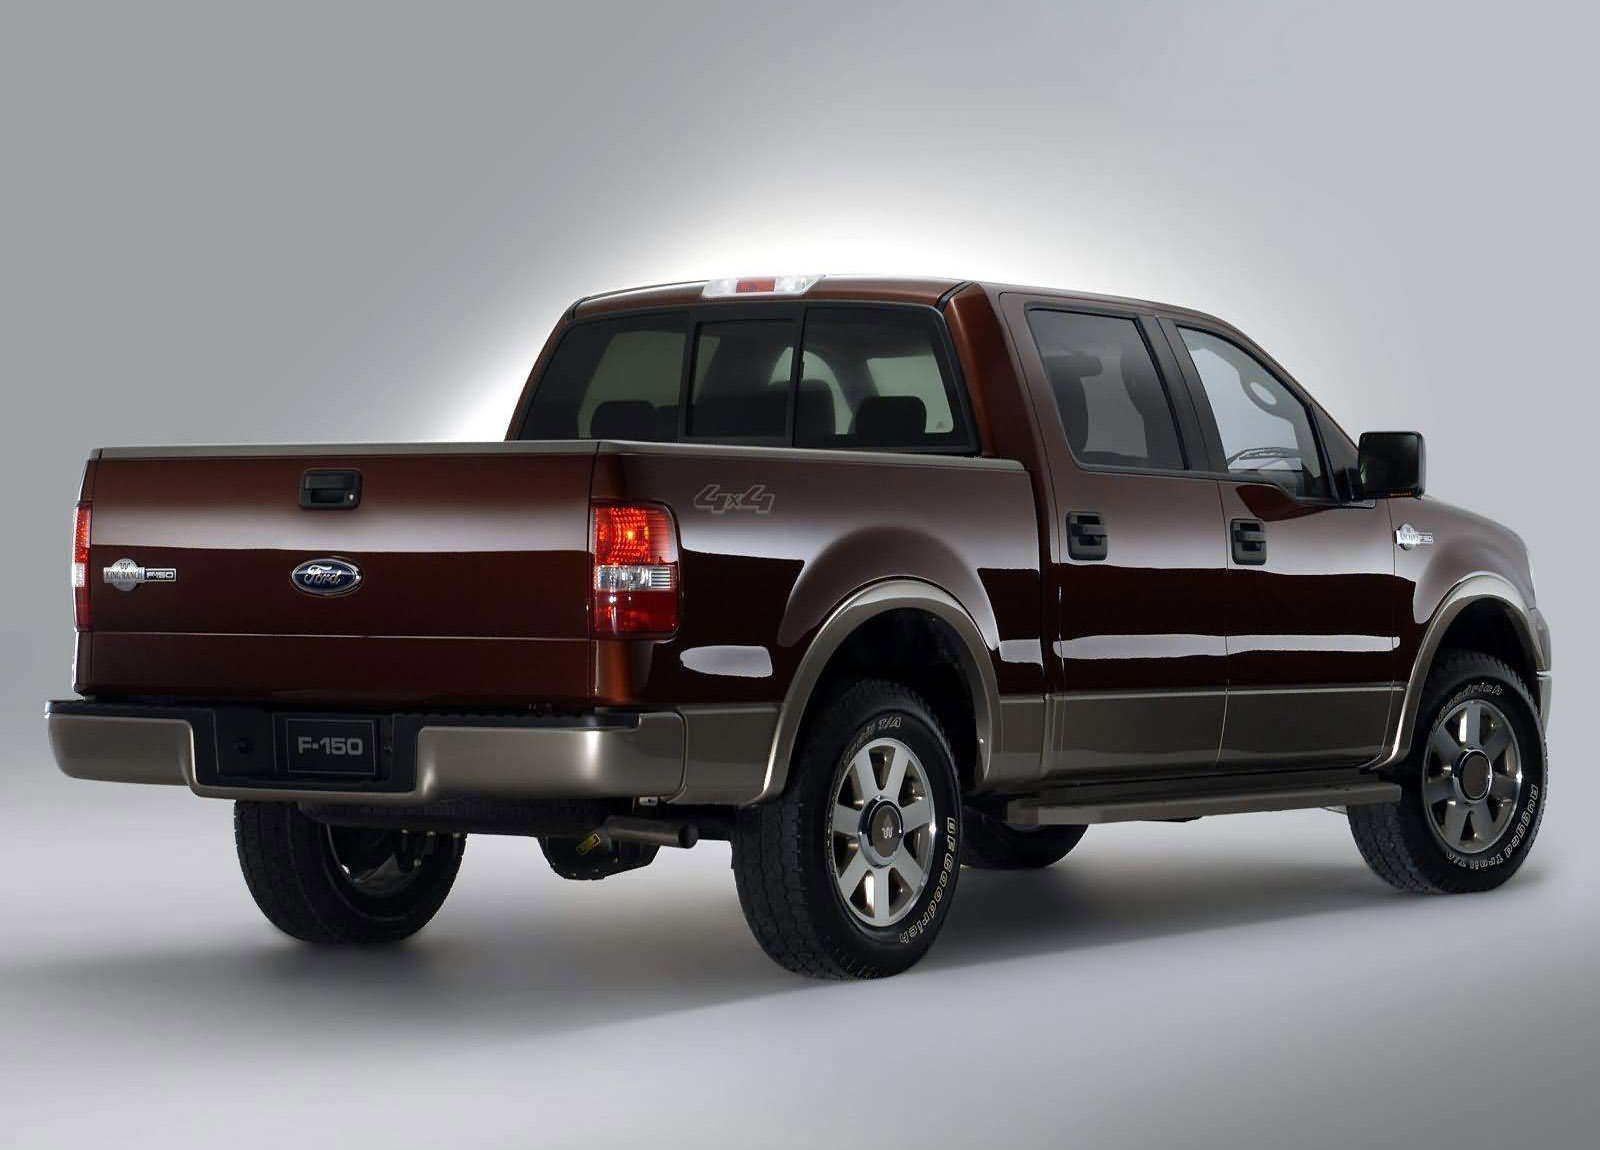 2005 Ford King Ranch F150 SuperCrew - HD Pictures @ carsinvasion.com